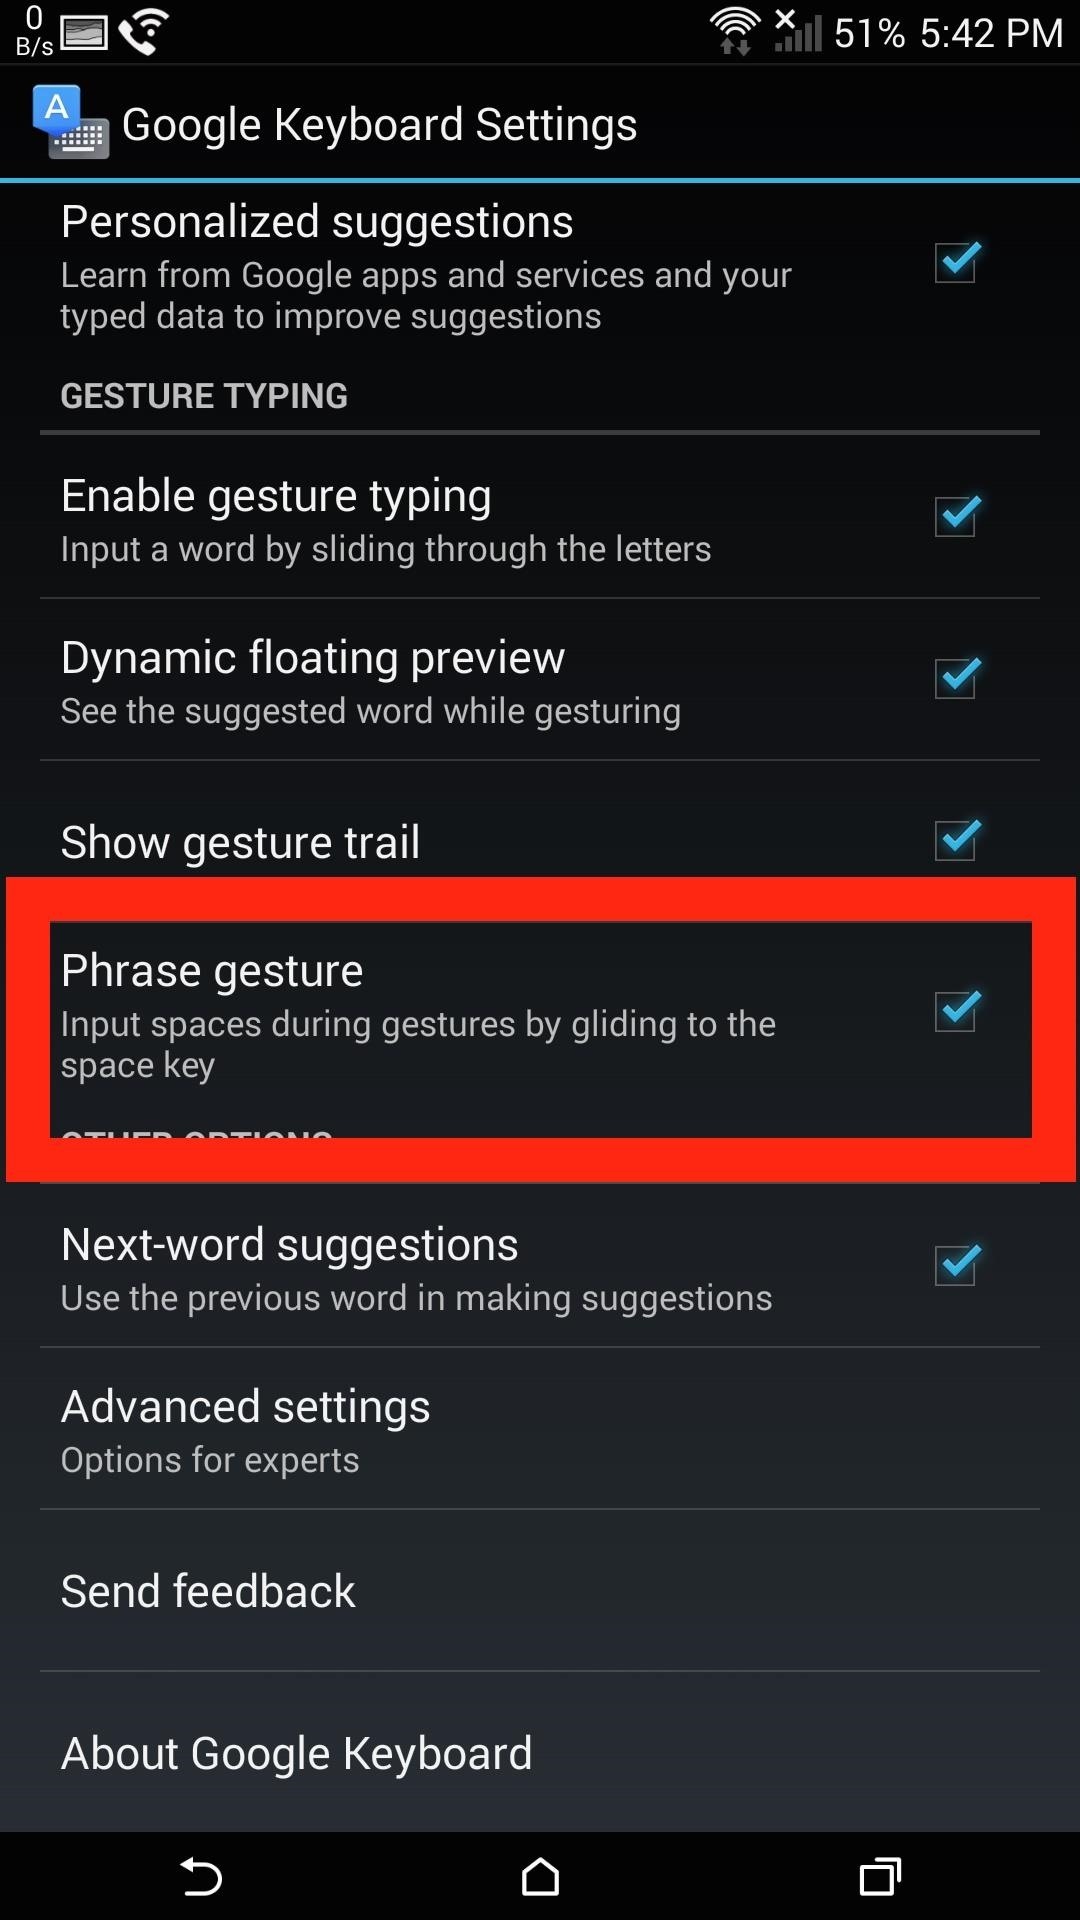 How to Get Android's New "L" Keyboard on Your HTC One or Other Android Device